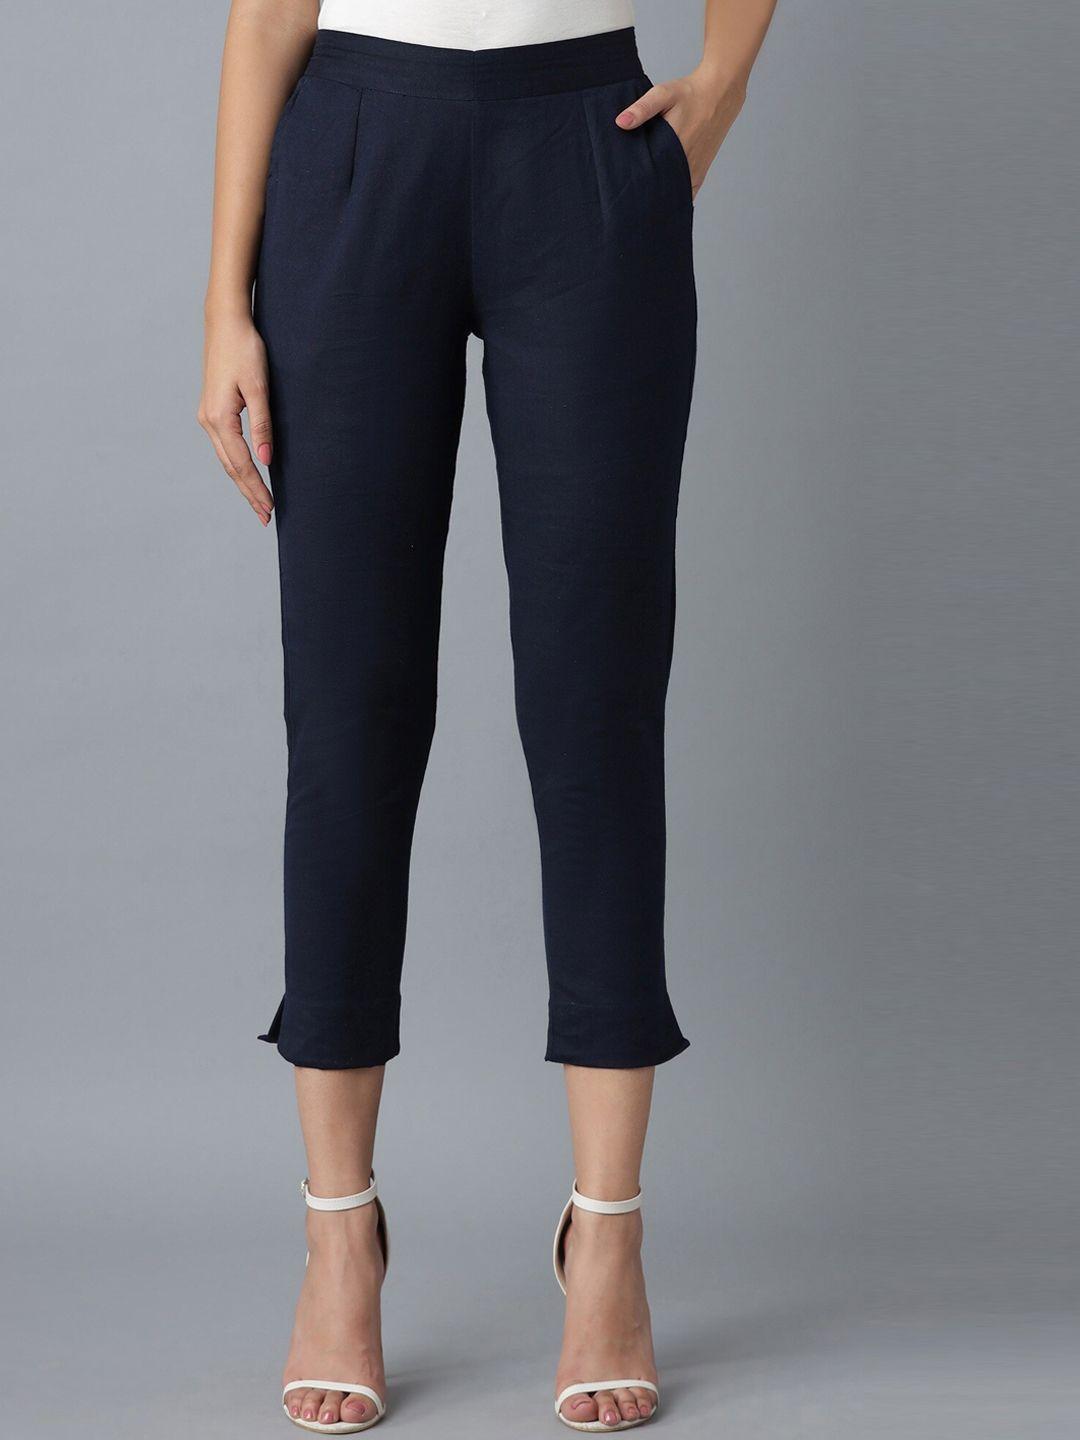 elleven women navy blue tapered fit pleated cigarette trousers